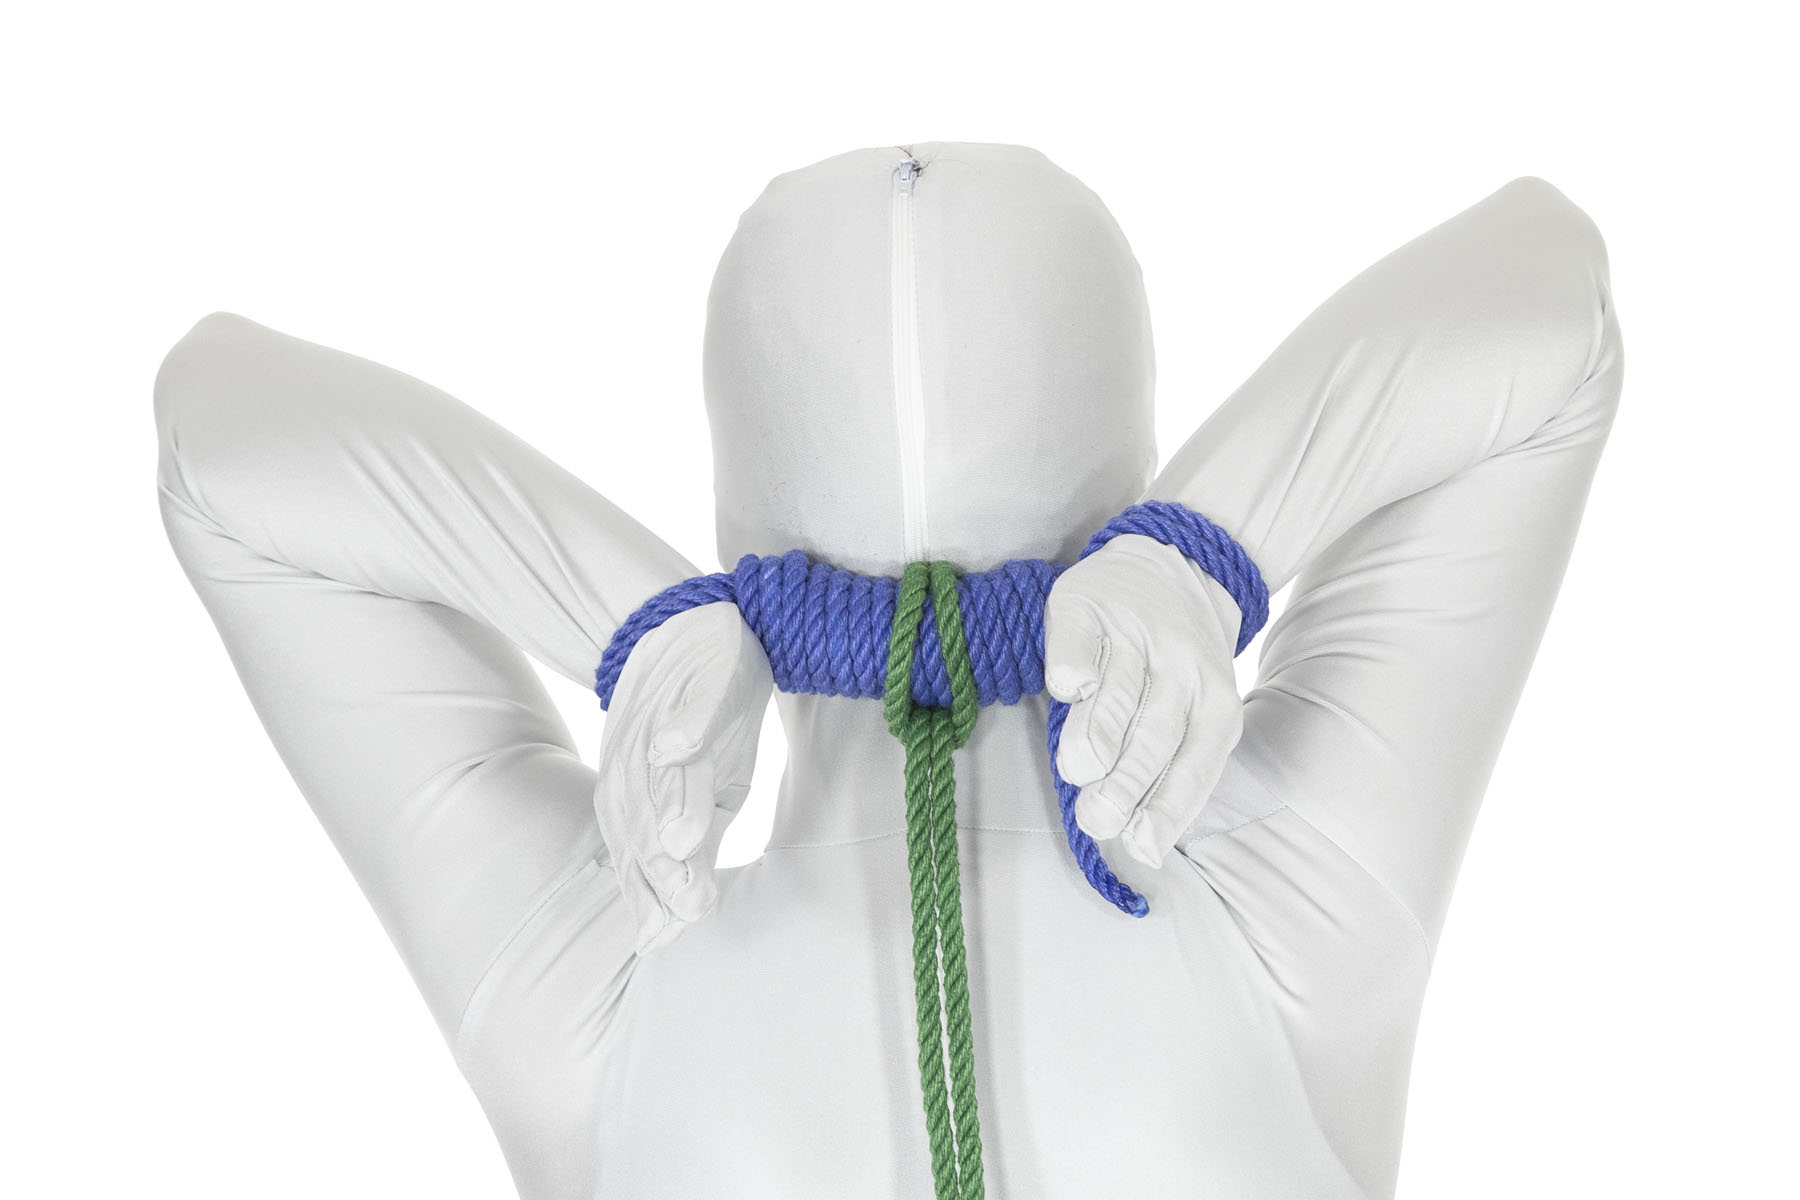 A rear view of a person with their hands tied behind the head by a blue bar tie that separates them by six inches. A green rope has been attached to the bar tie with a larks head, with the tail of the rope going down the body.